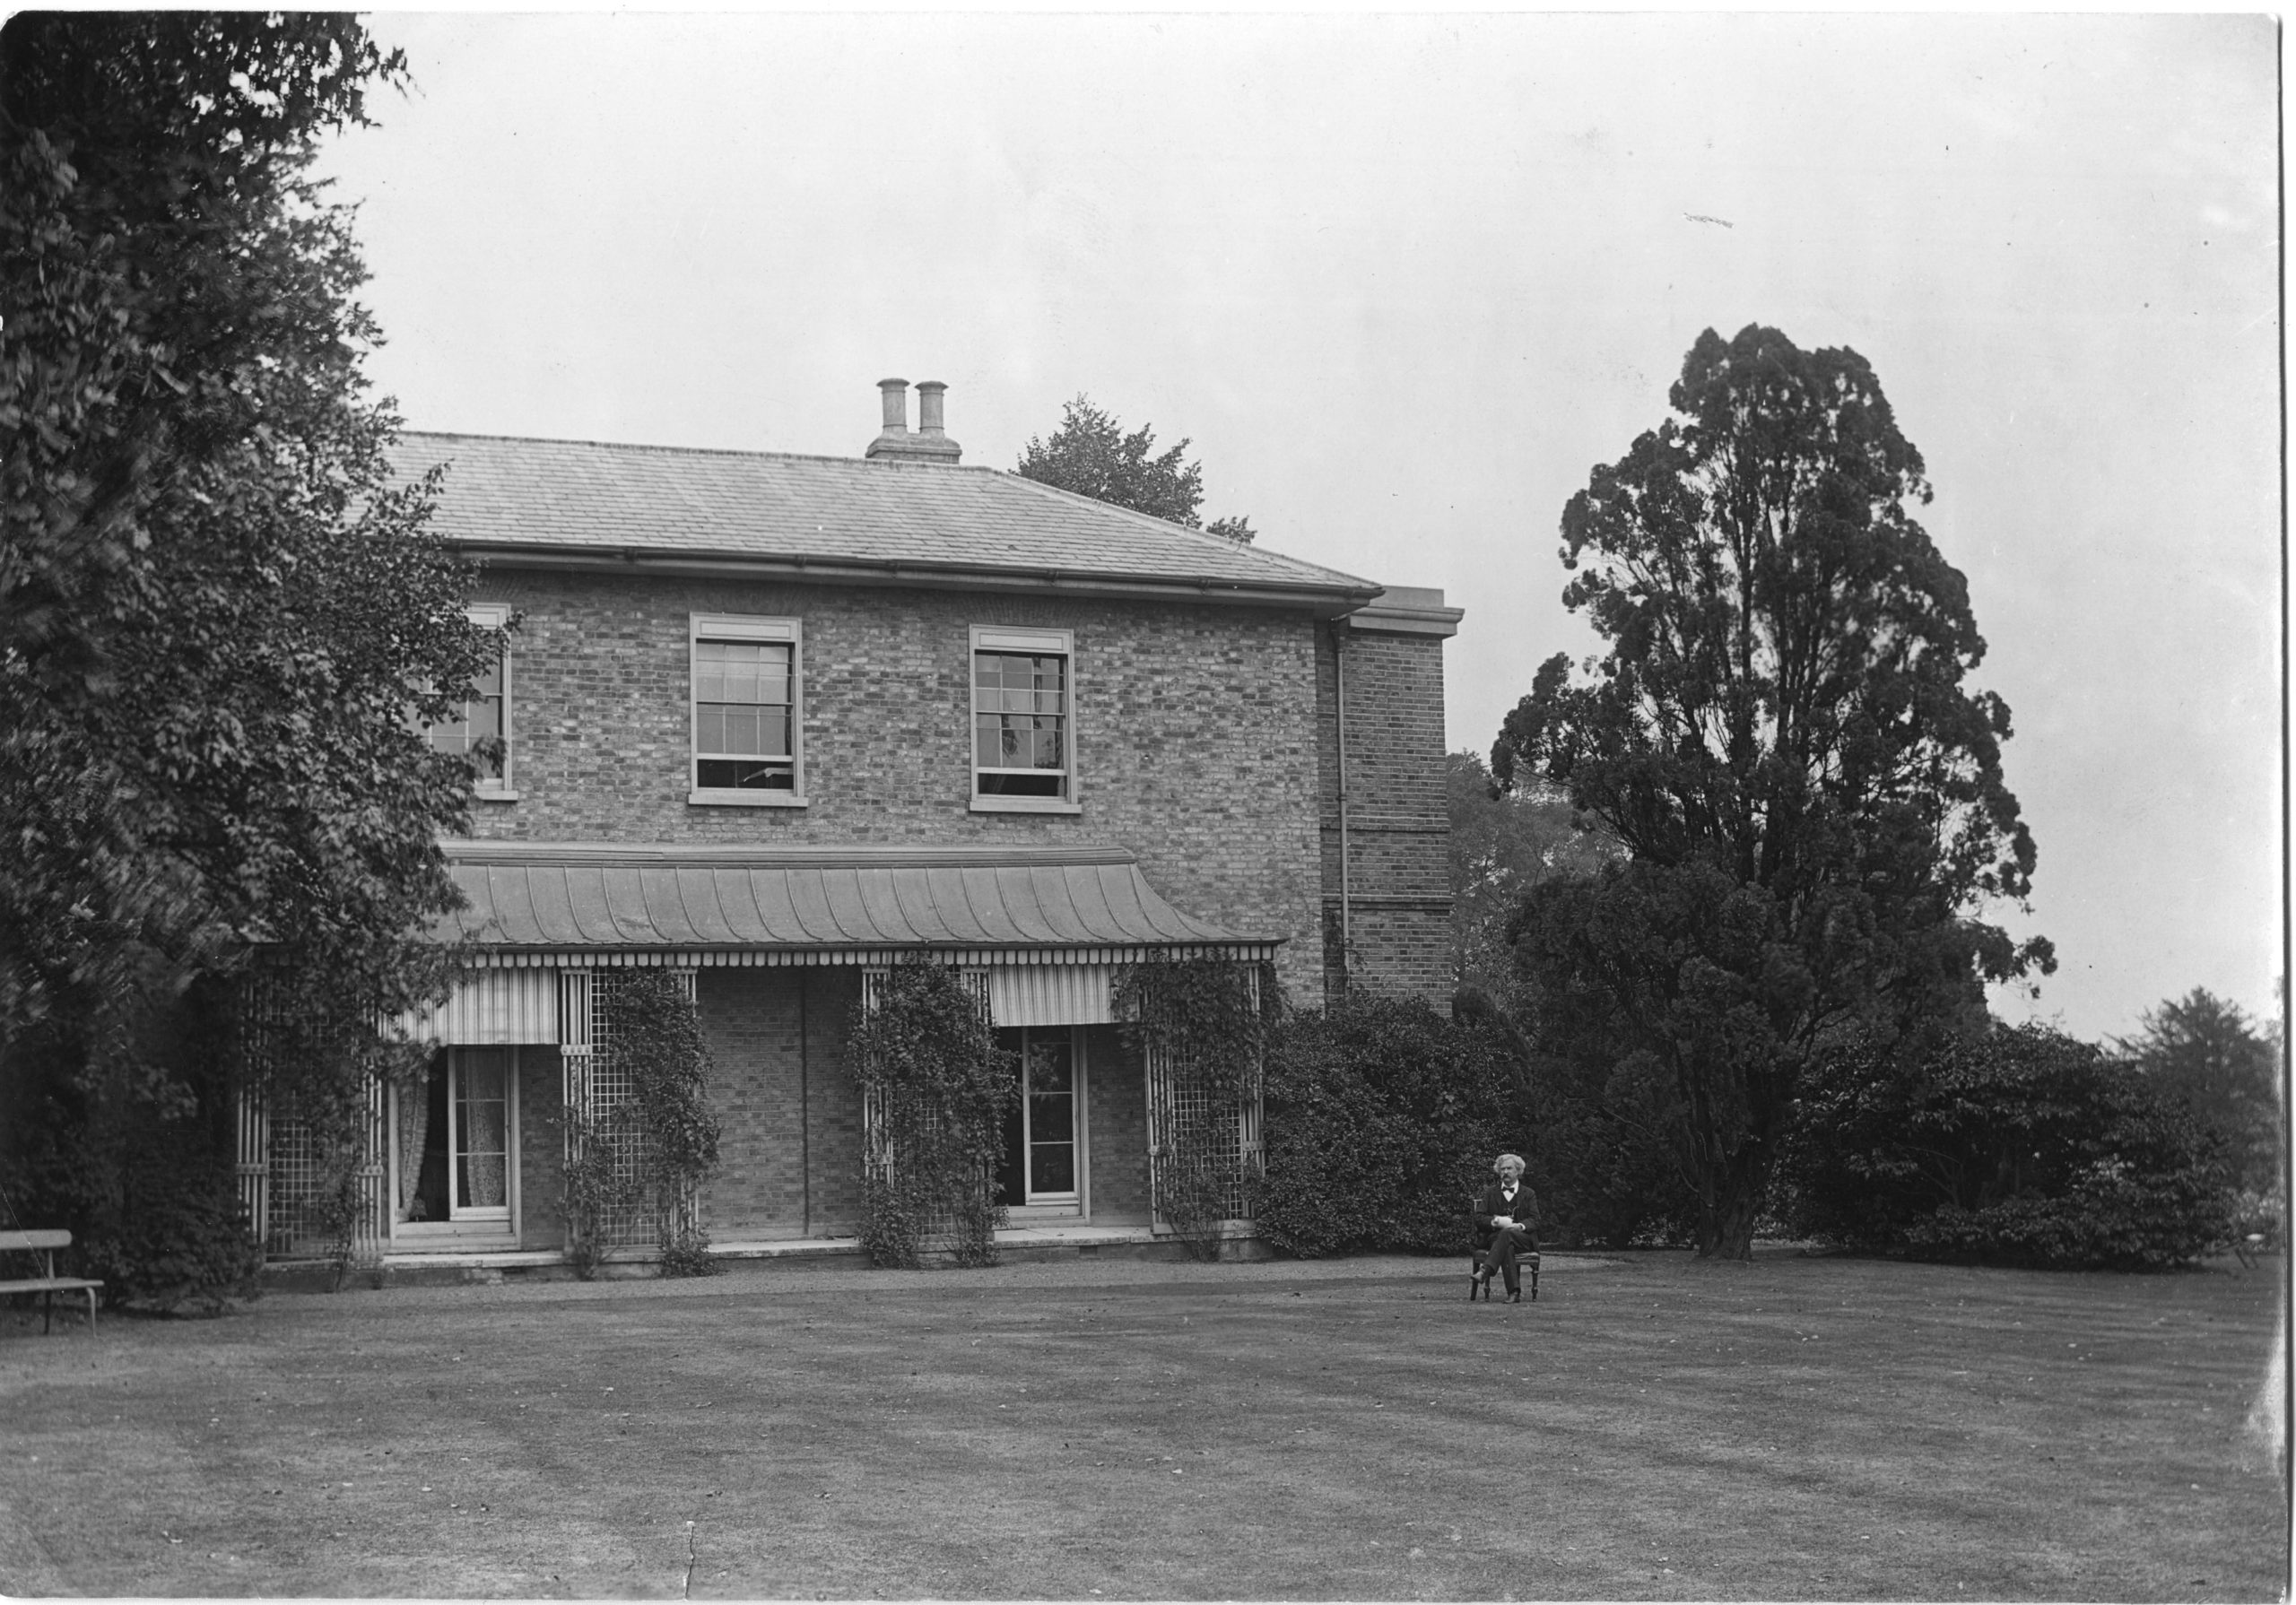 004_Dollis Hill House Vintage photograph_Sam Clemens at back of house.mth